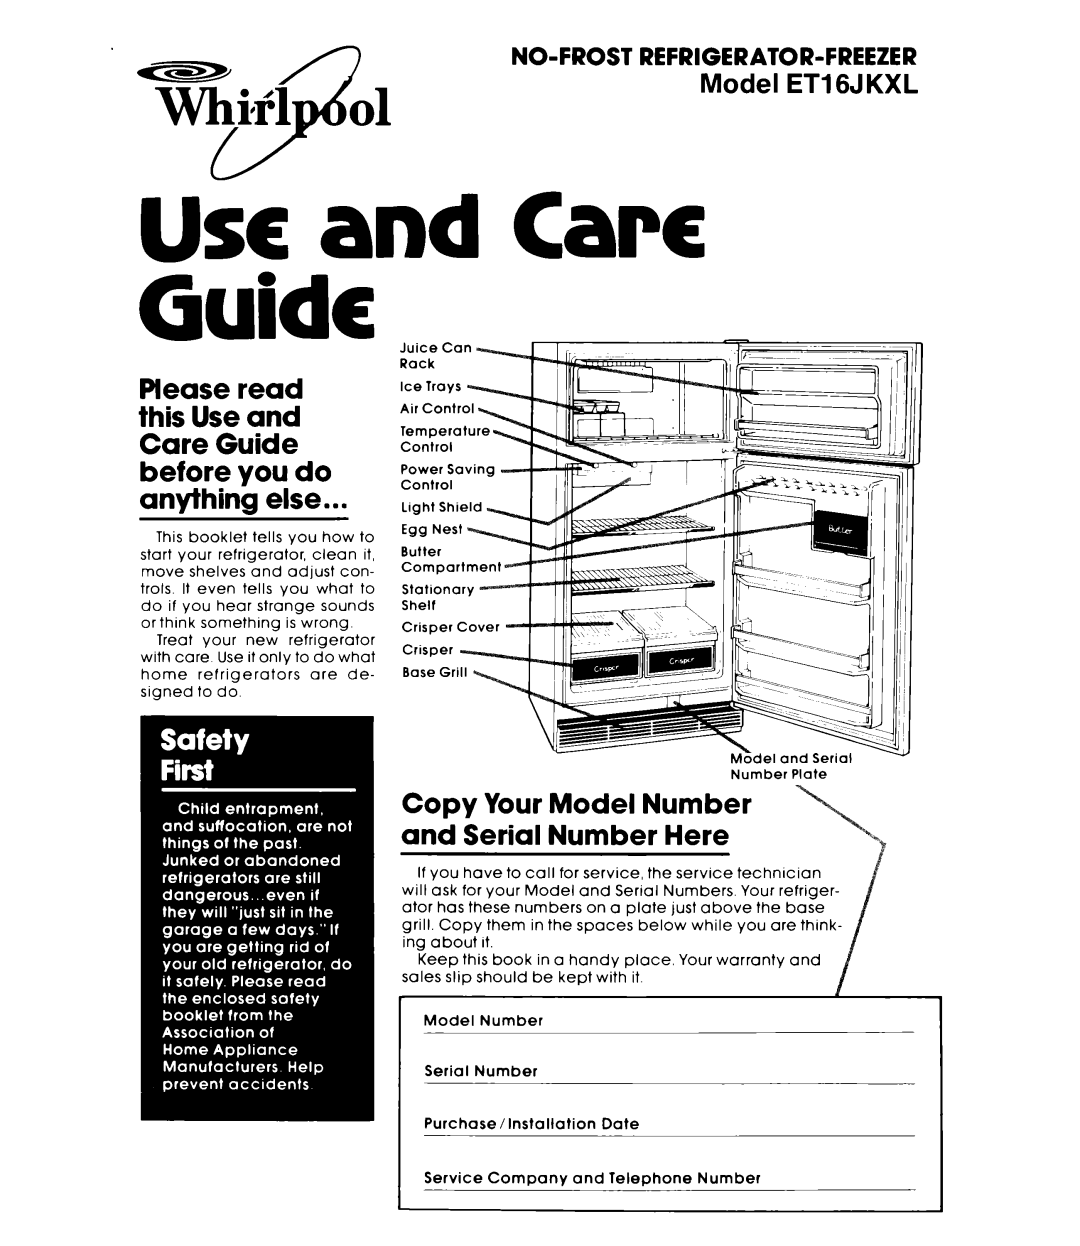 Whirlpool ET16JKXL warranty Copy Your Model Number and Serial Number Here, No-Frost Refrigerator-Freezer, Care Guide 